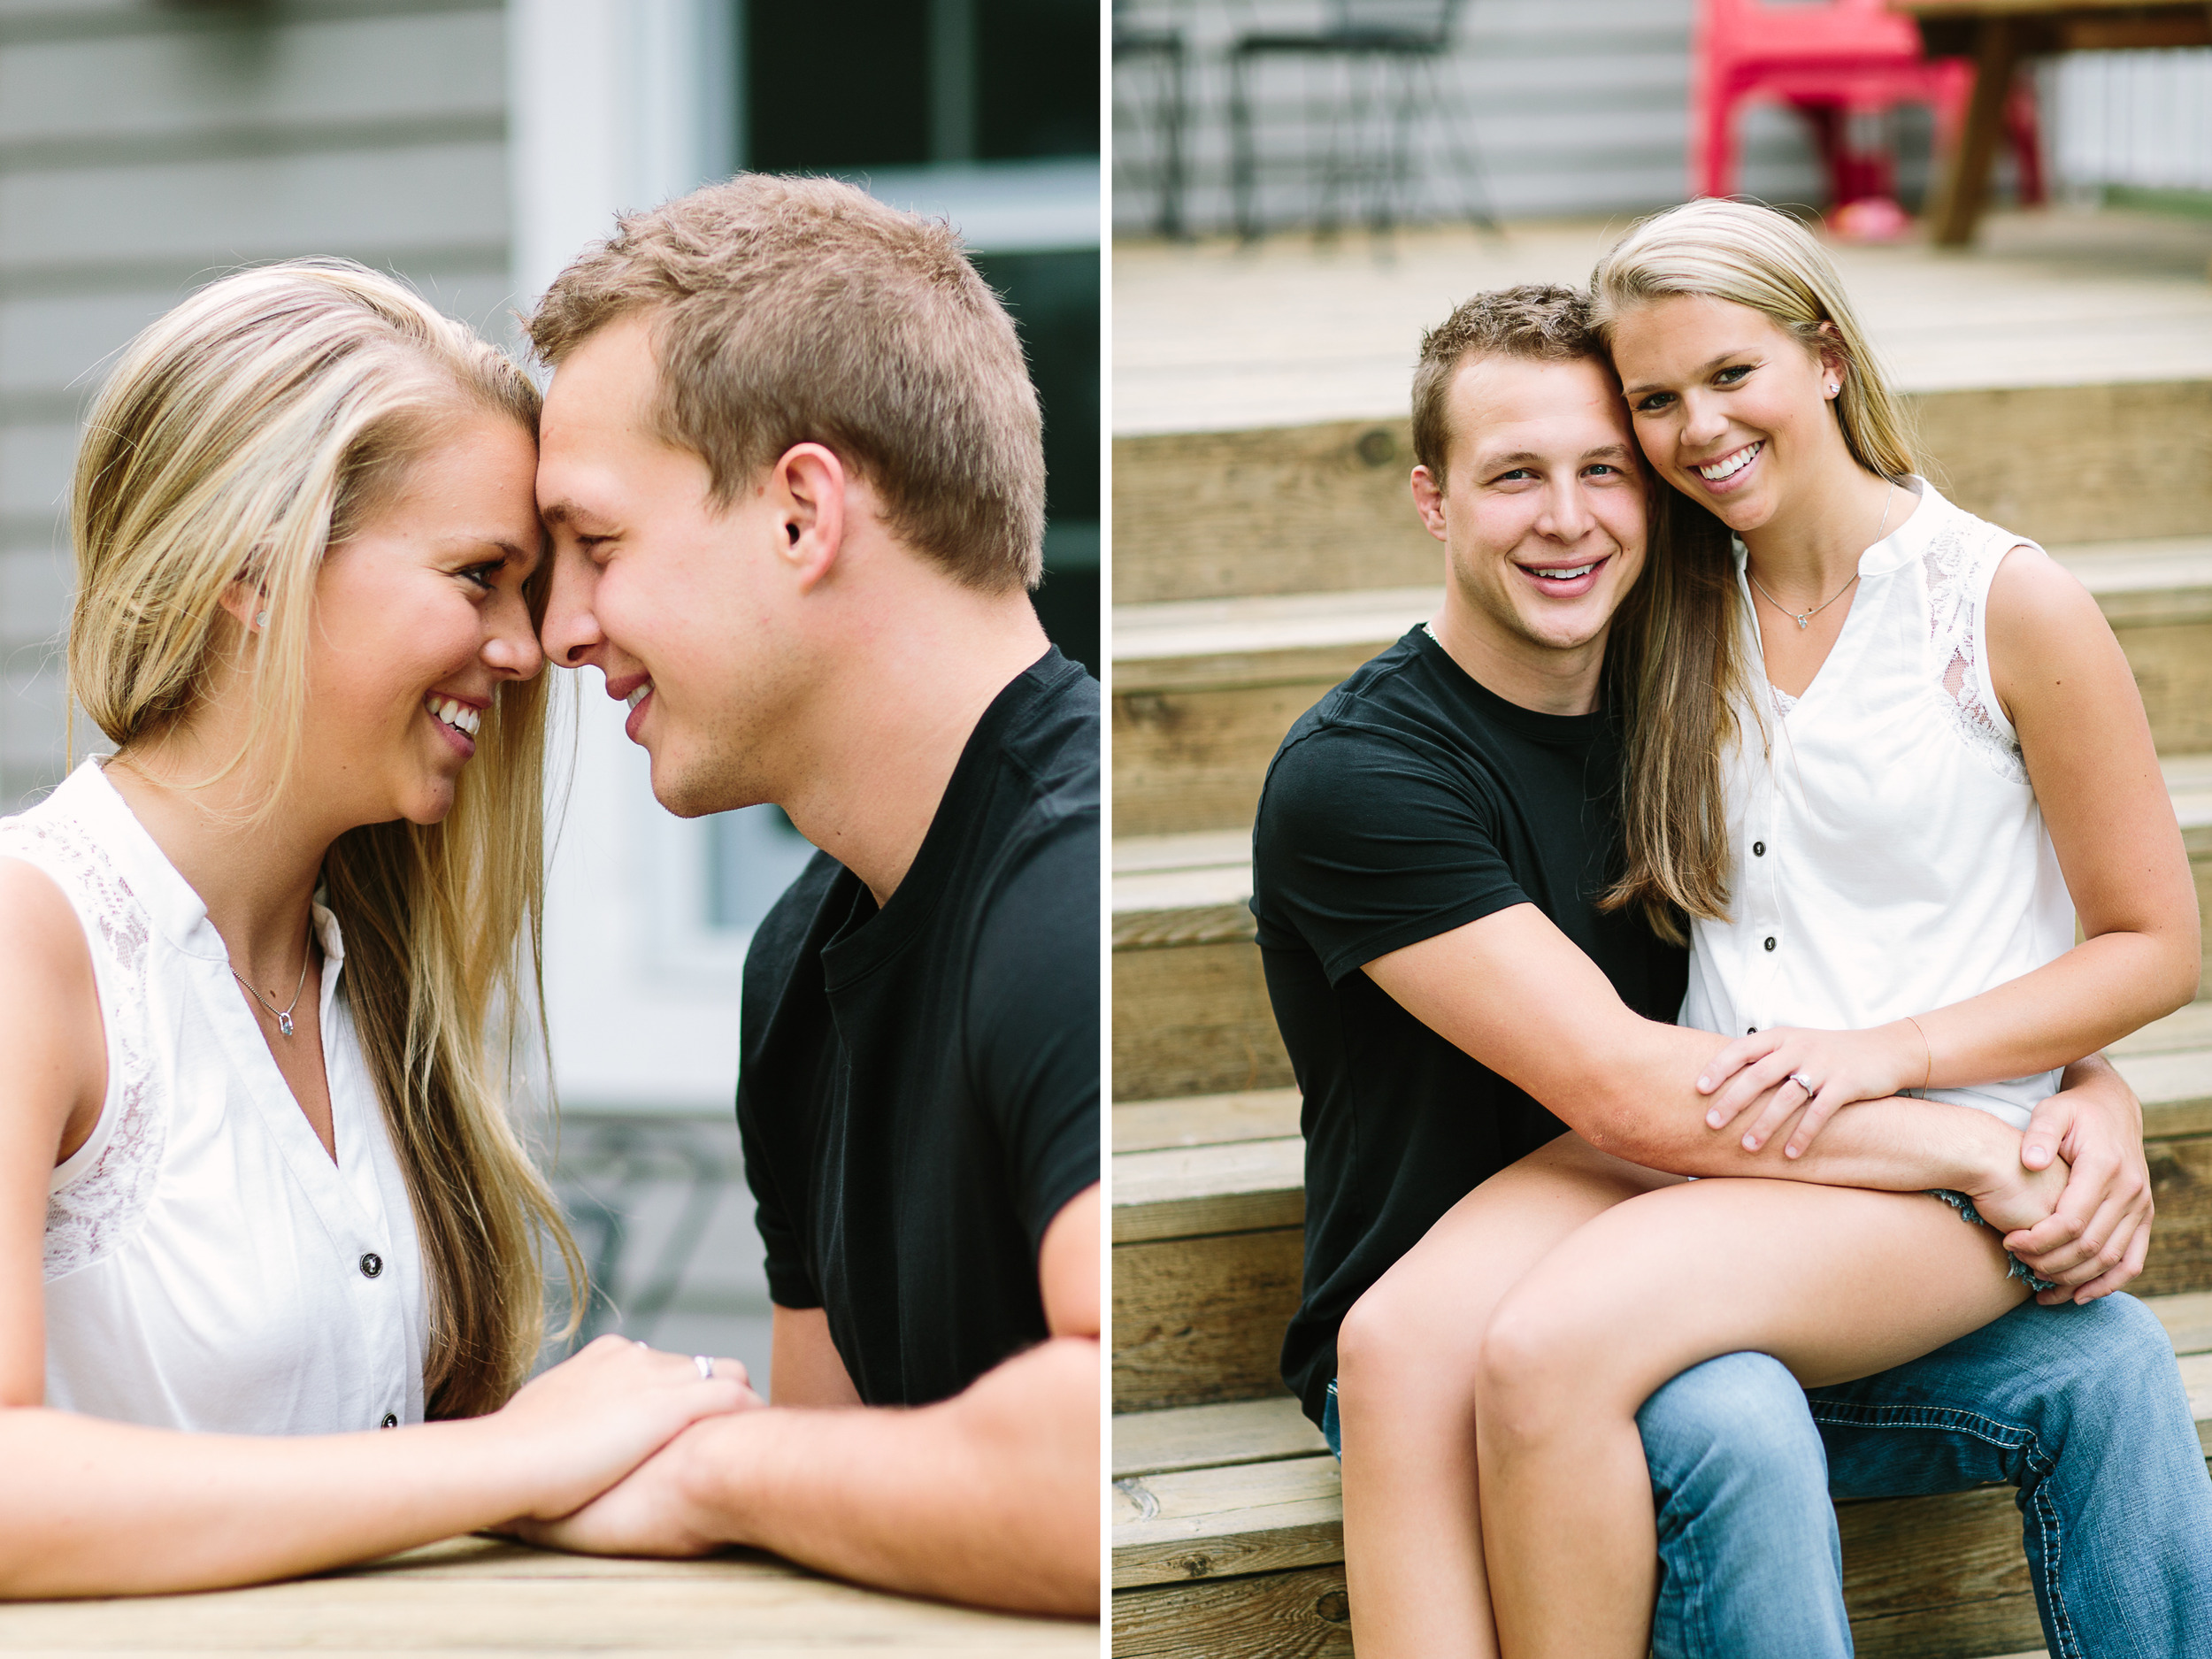 A summer engagement session at Grand View Lodge in Nisswa, MN